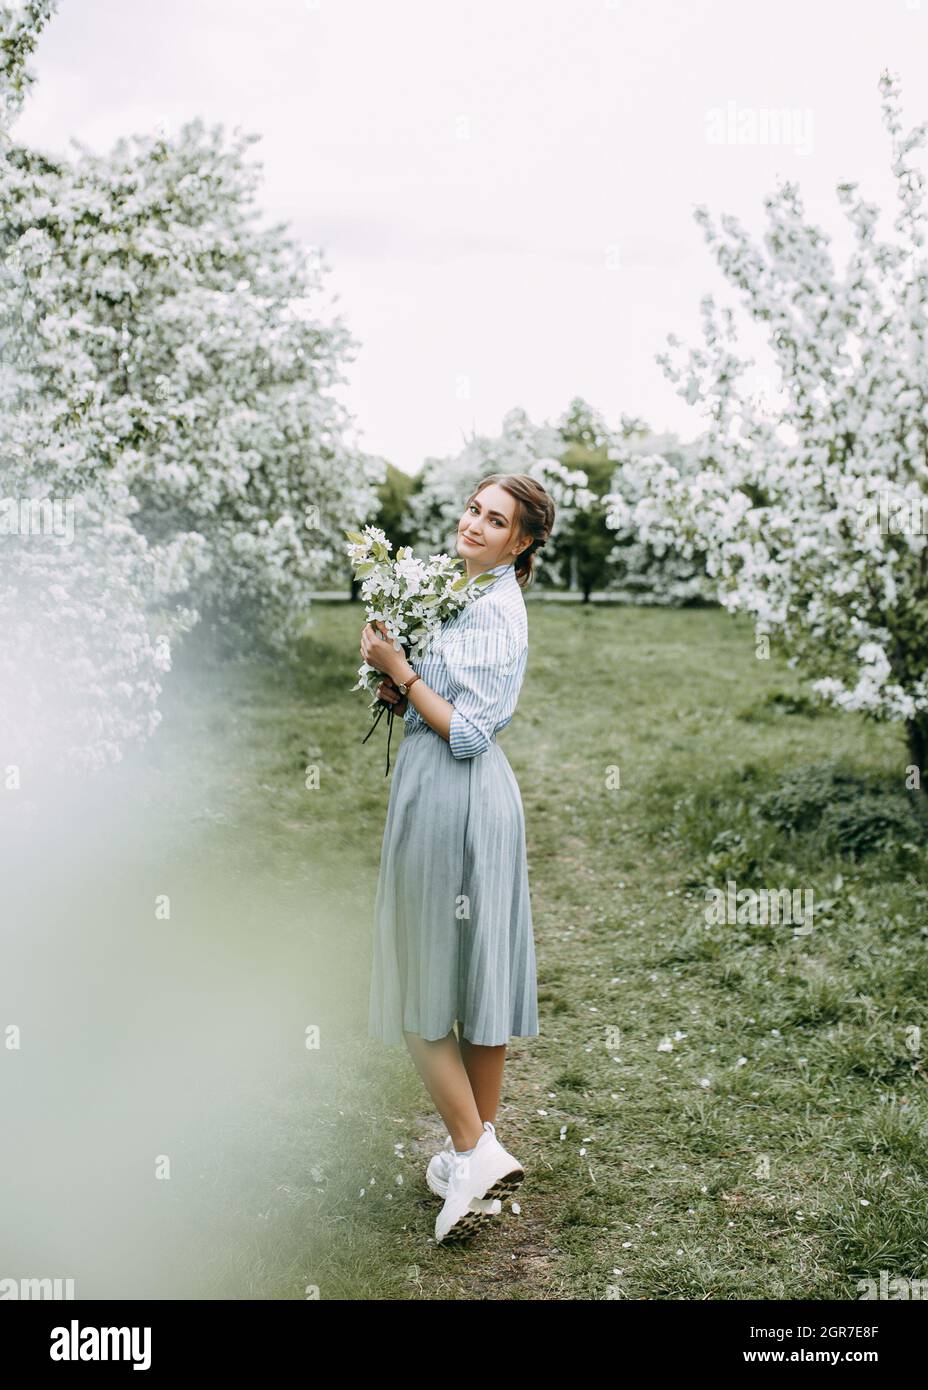 Beautiful Pretty Young Woman Walks Enjoying The Aroma Of Blooming Apple Flowers In A Spring Park Stock Photo